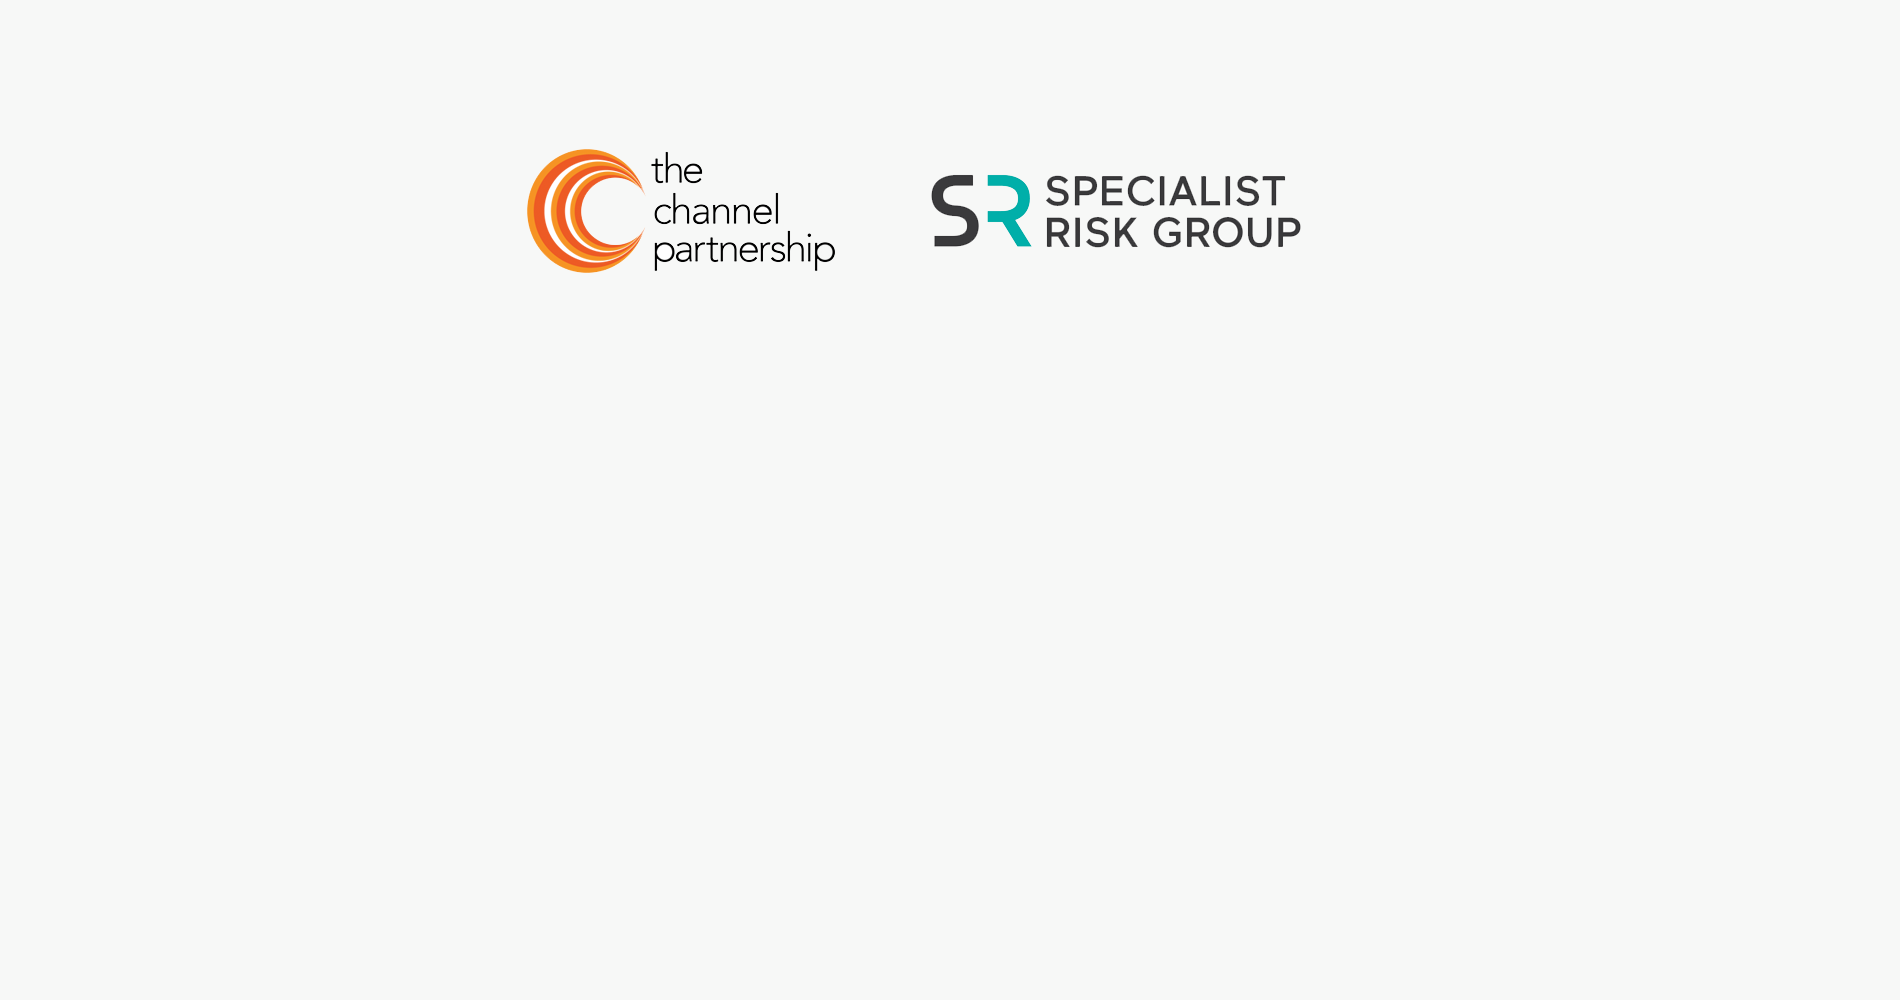 The Channel Partnership joins Specialist Risk Group